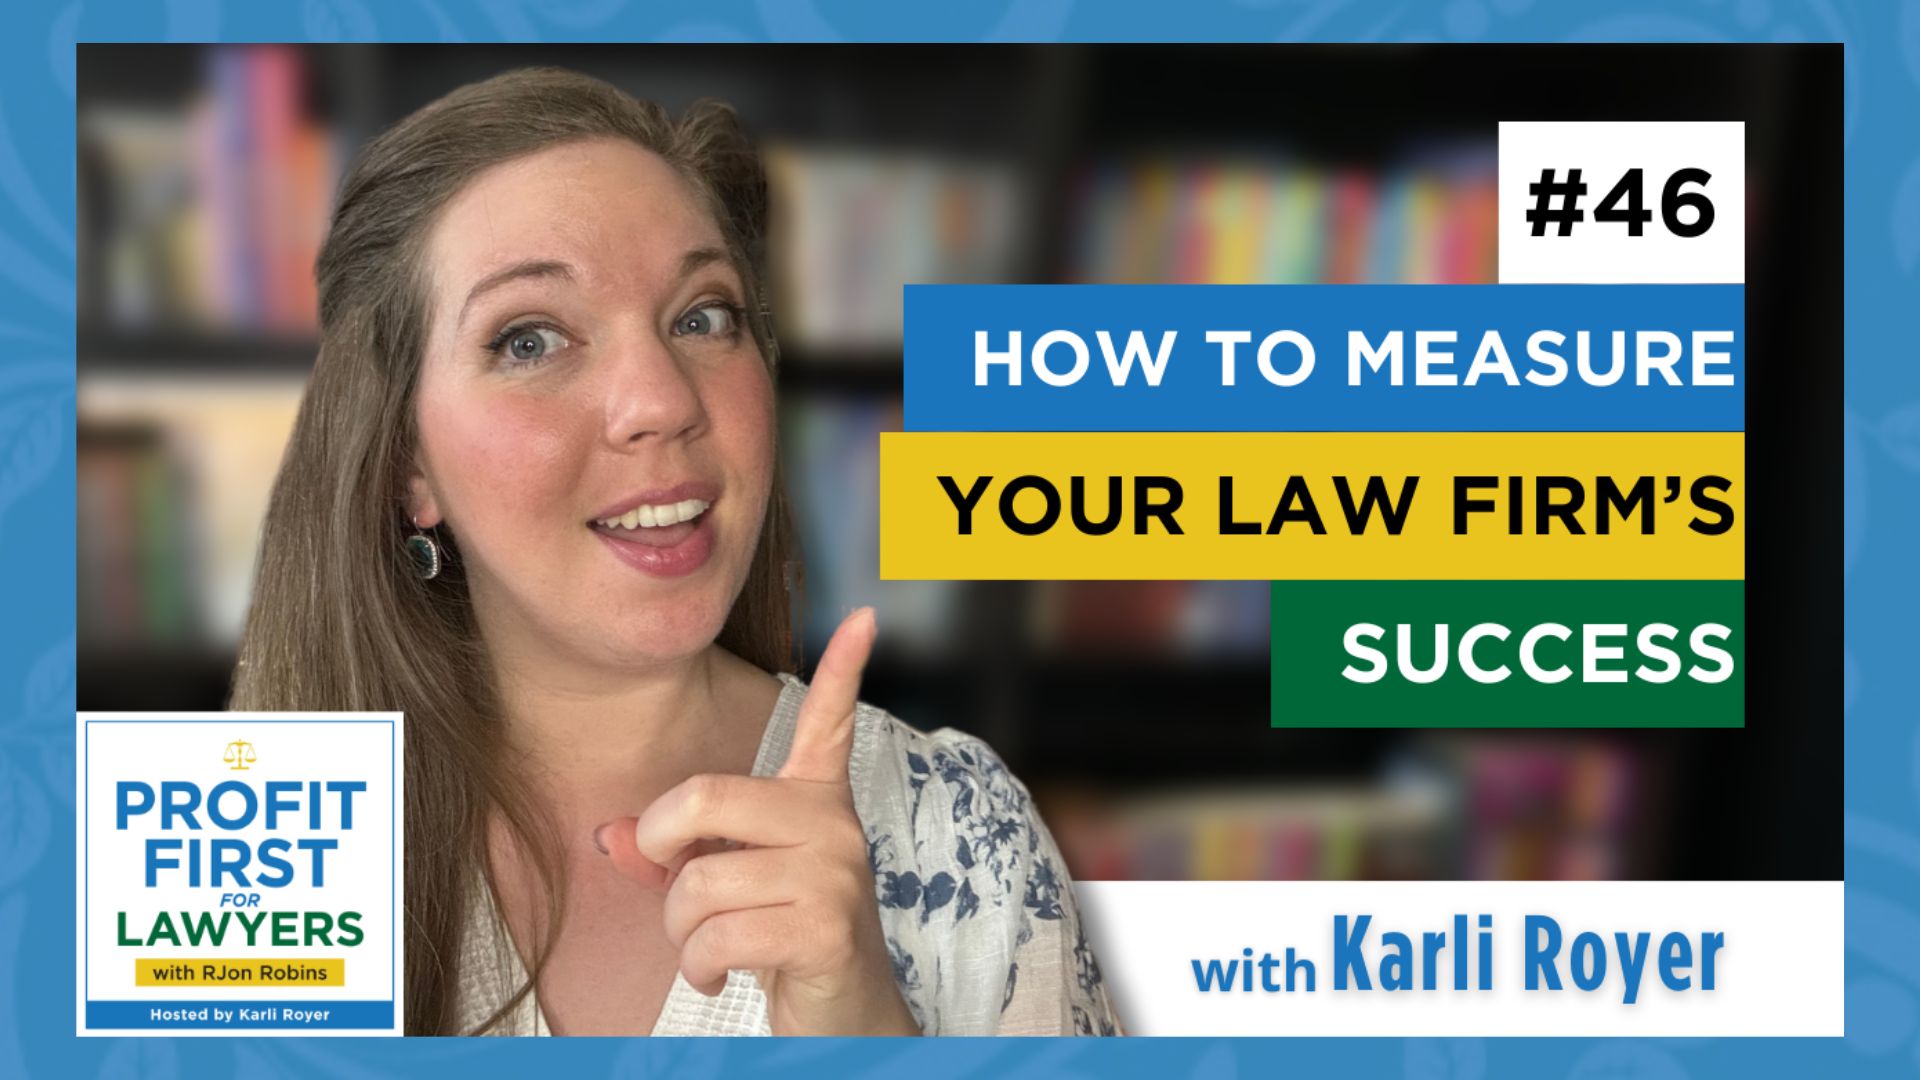 featured image of Karli Royer (host of Profit First For Lawyers podcast) pointing towards the title of the episode, "How To Measure Your Law Firm's Success" Episode 46.